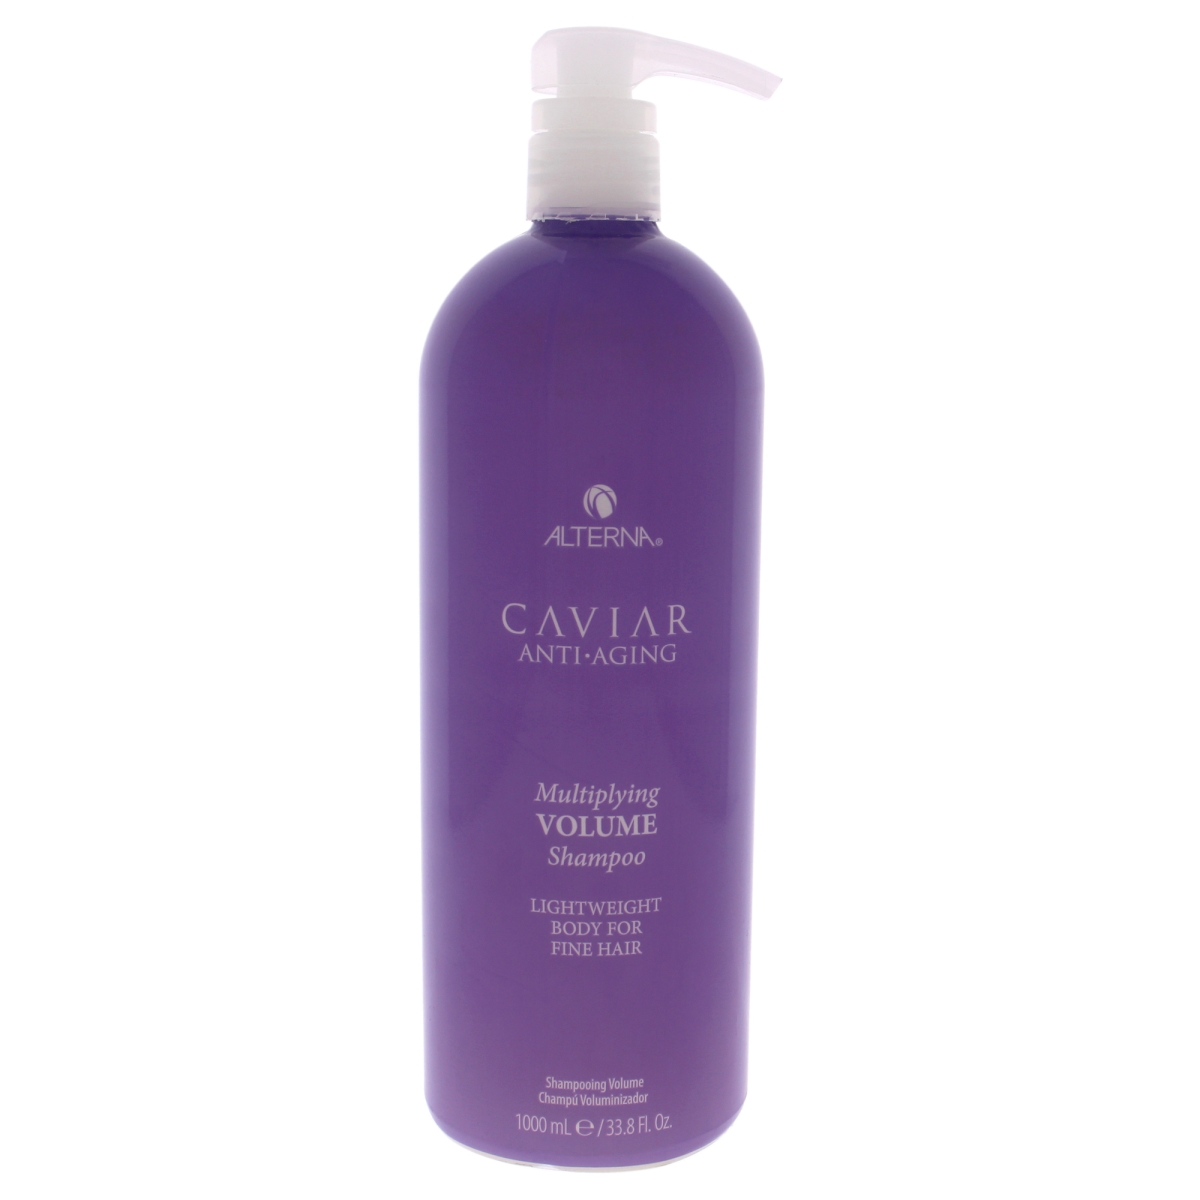 Picture of Alterna I0097577 33.8 oz Caviar Anti-Aging Multiplying Volume Shampoo for Unisex